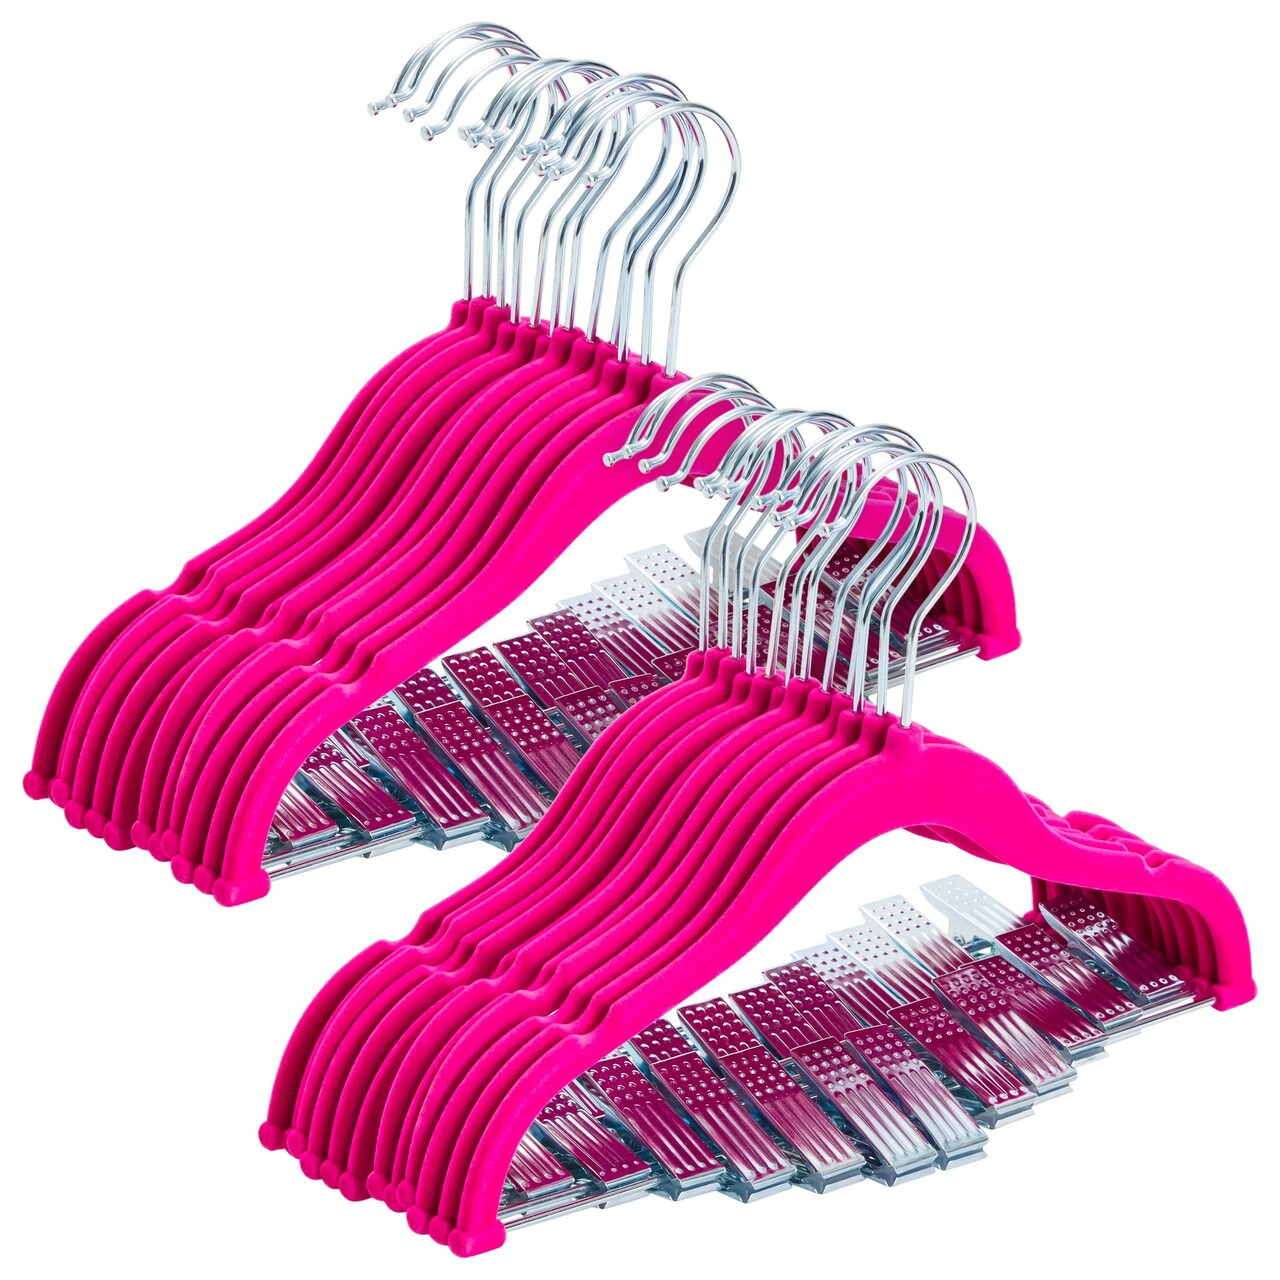 24 Pack Hot Pink Velvet Hangers with Clips for Kids, Baby Nursery,  Children's Closet, Dresses, Shirts, Pants, Skirts, Ultra Thin, Nonslip,  Space-Saving (12 Inches)